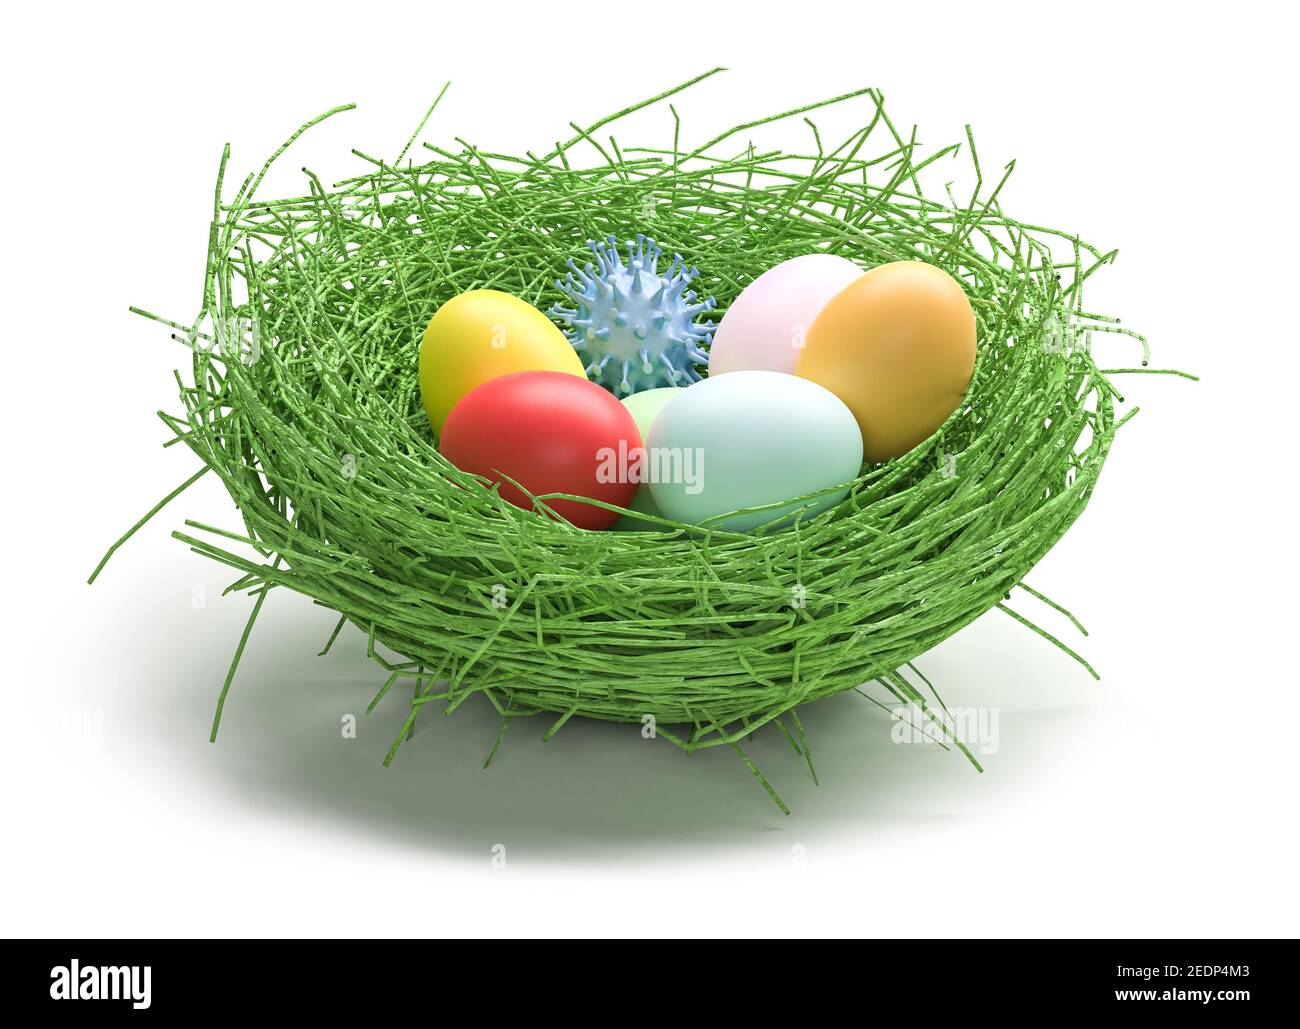 Easter and Coronavirus concept: An easter nest with colored easter eggs and a corona virus model. Isolated on white. Stay safe at easter. Stock Photo